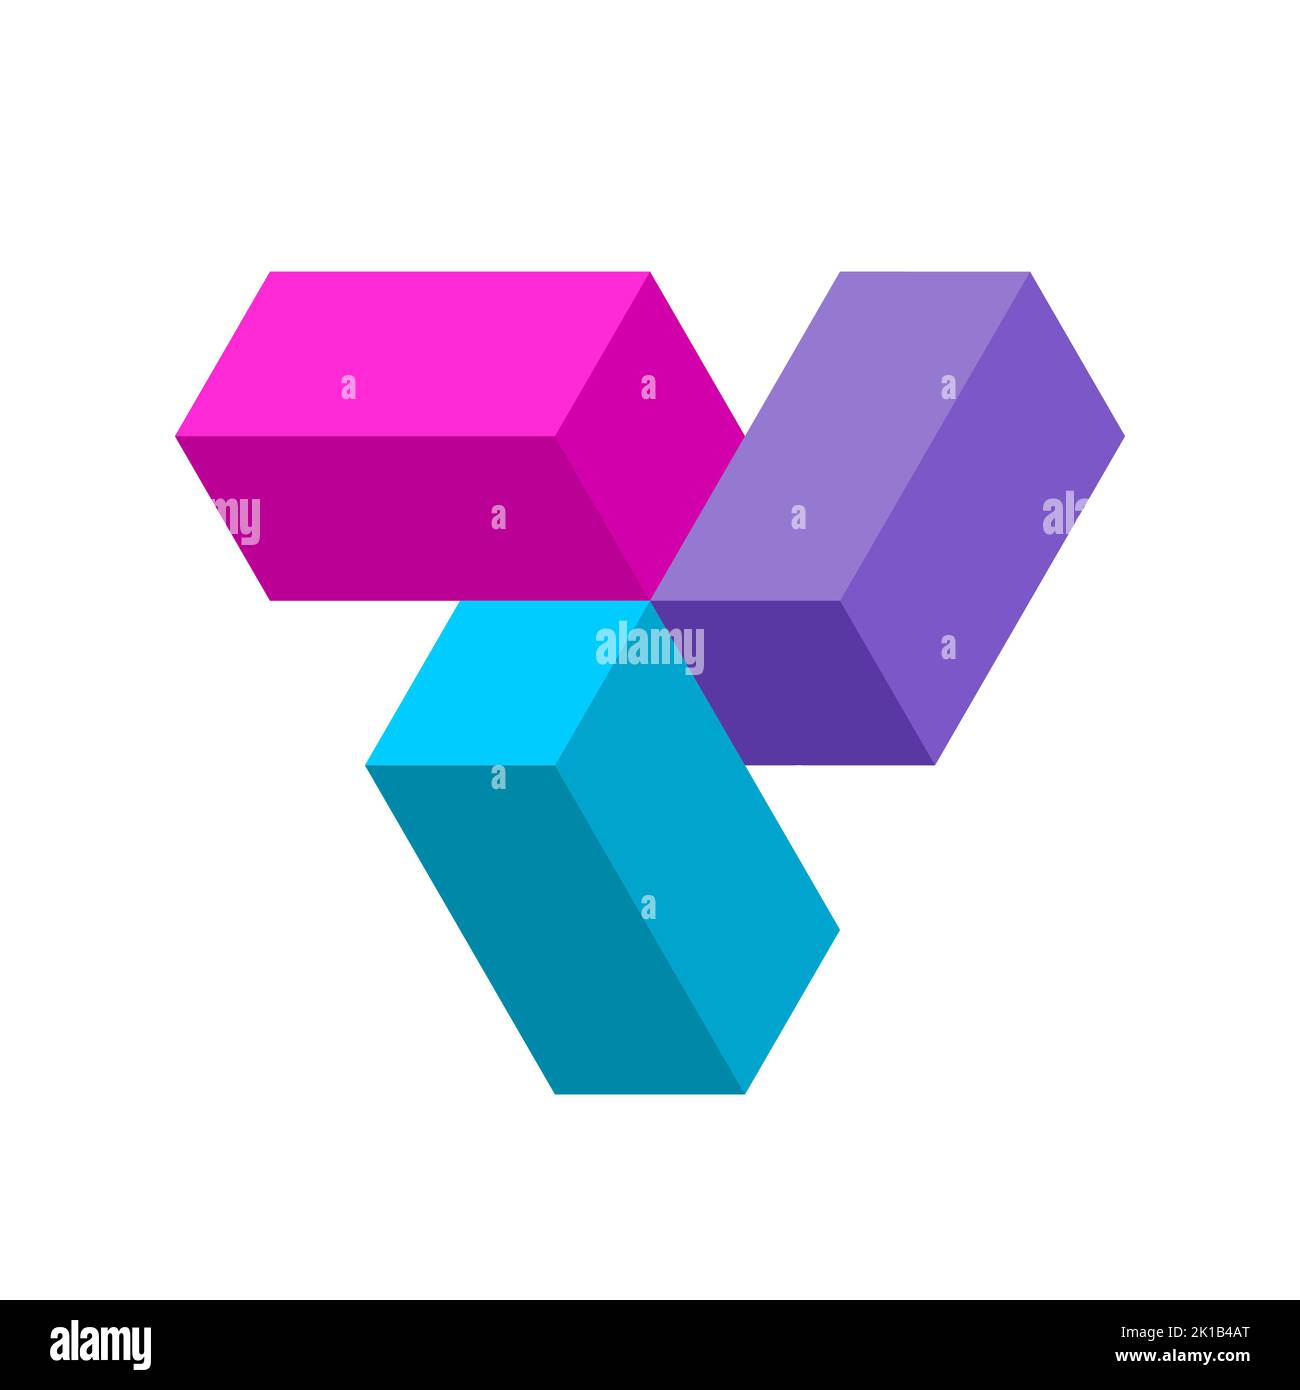 Colorful 3D propeller like shape. Three dynamic rectangles rotating. Isometric block elements. Three brick elements connected in a center. Vector Stock Vector